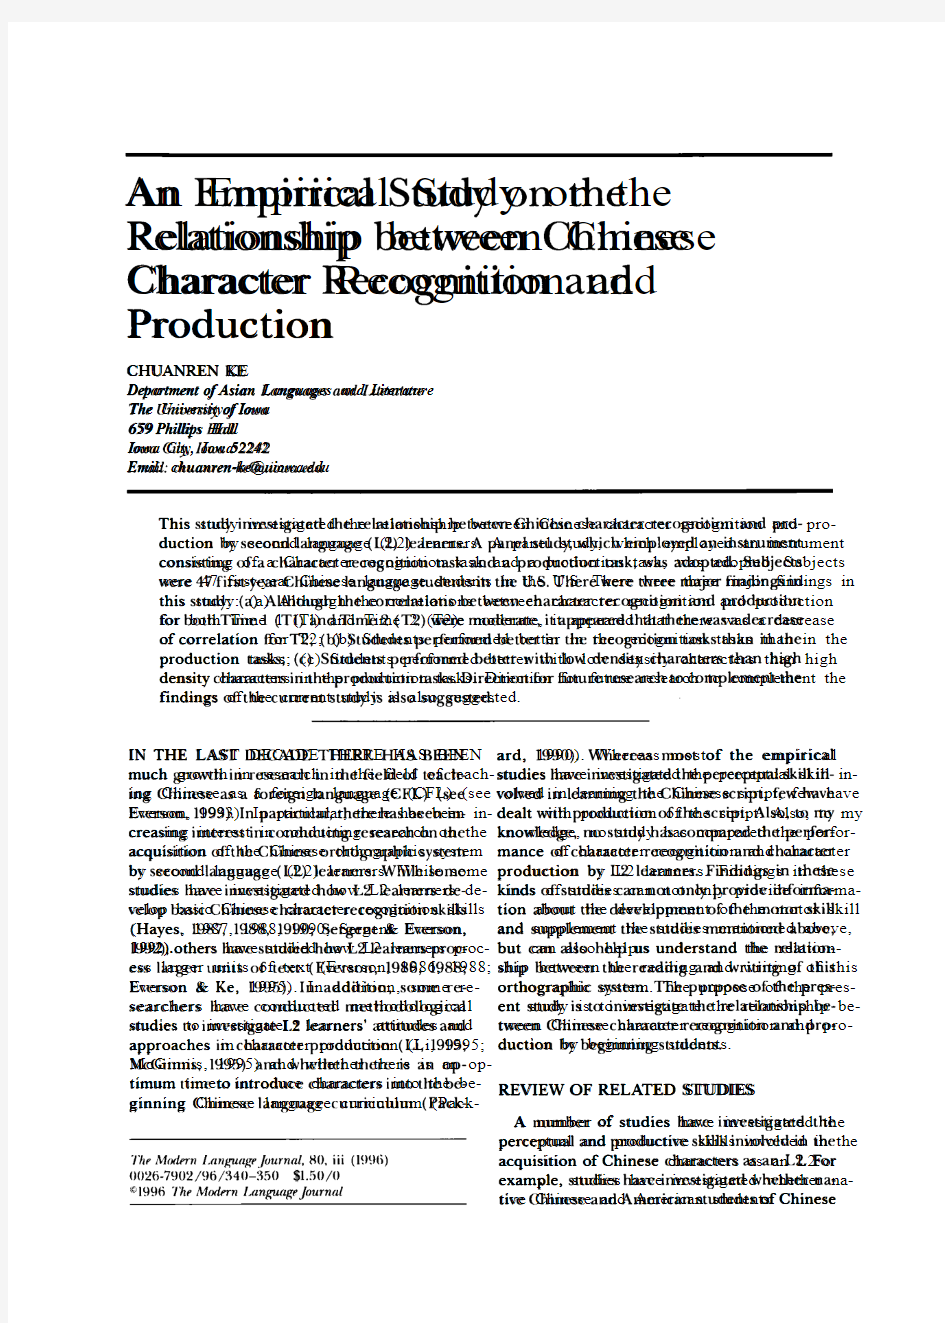 An Empirical Study on the Relationship between Chinese Character Recognition and Production